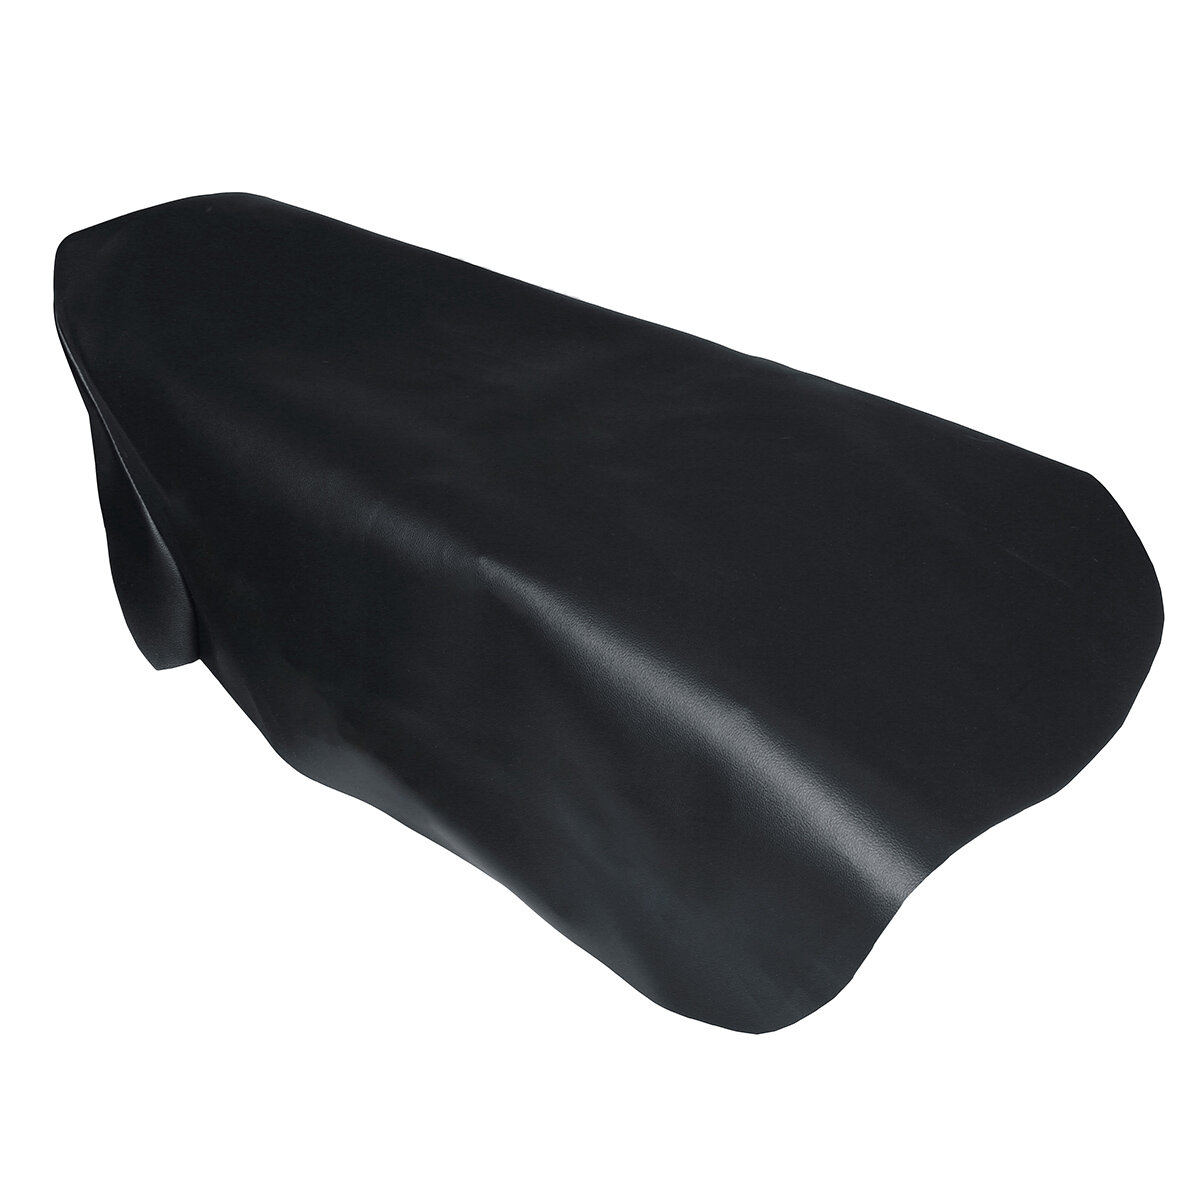 PU Leather Motorcycle ATV Seat Cover For Honda Fourtrax 300 Seat Cover 1988-2000 Black